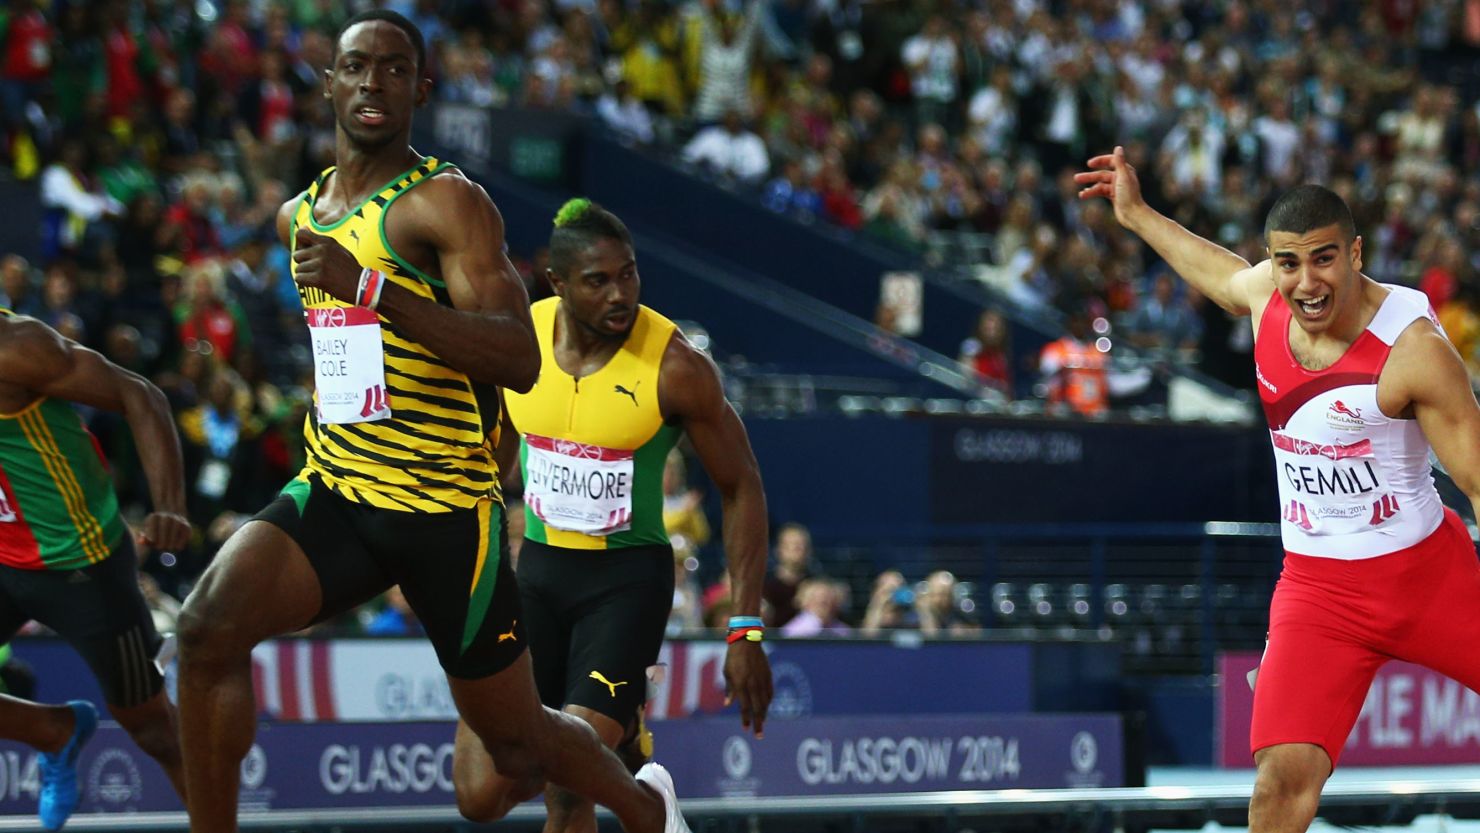 Kemar Bailey-Cole crests the tape ahead of Adam Gemili of England to take the Commonwealth Games 100 title.